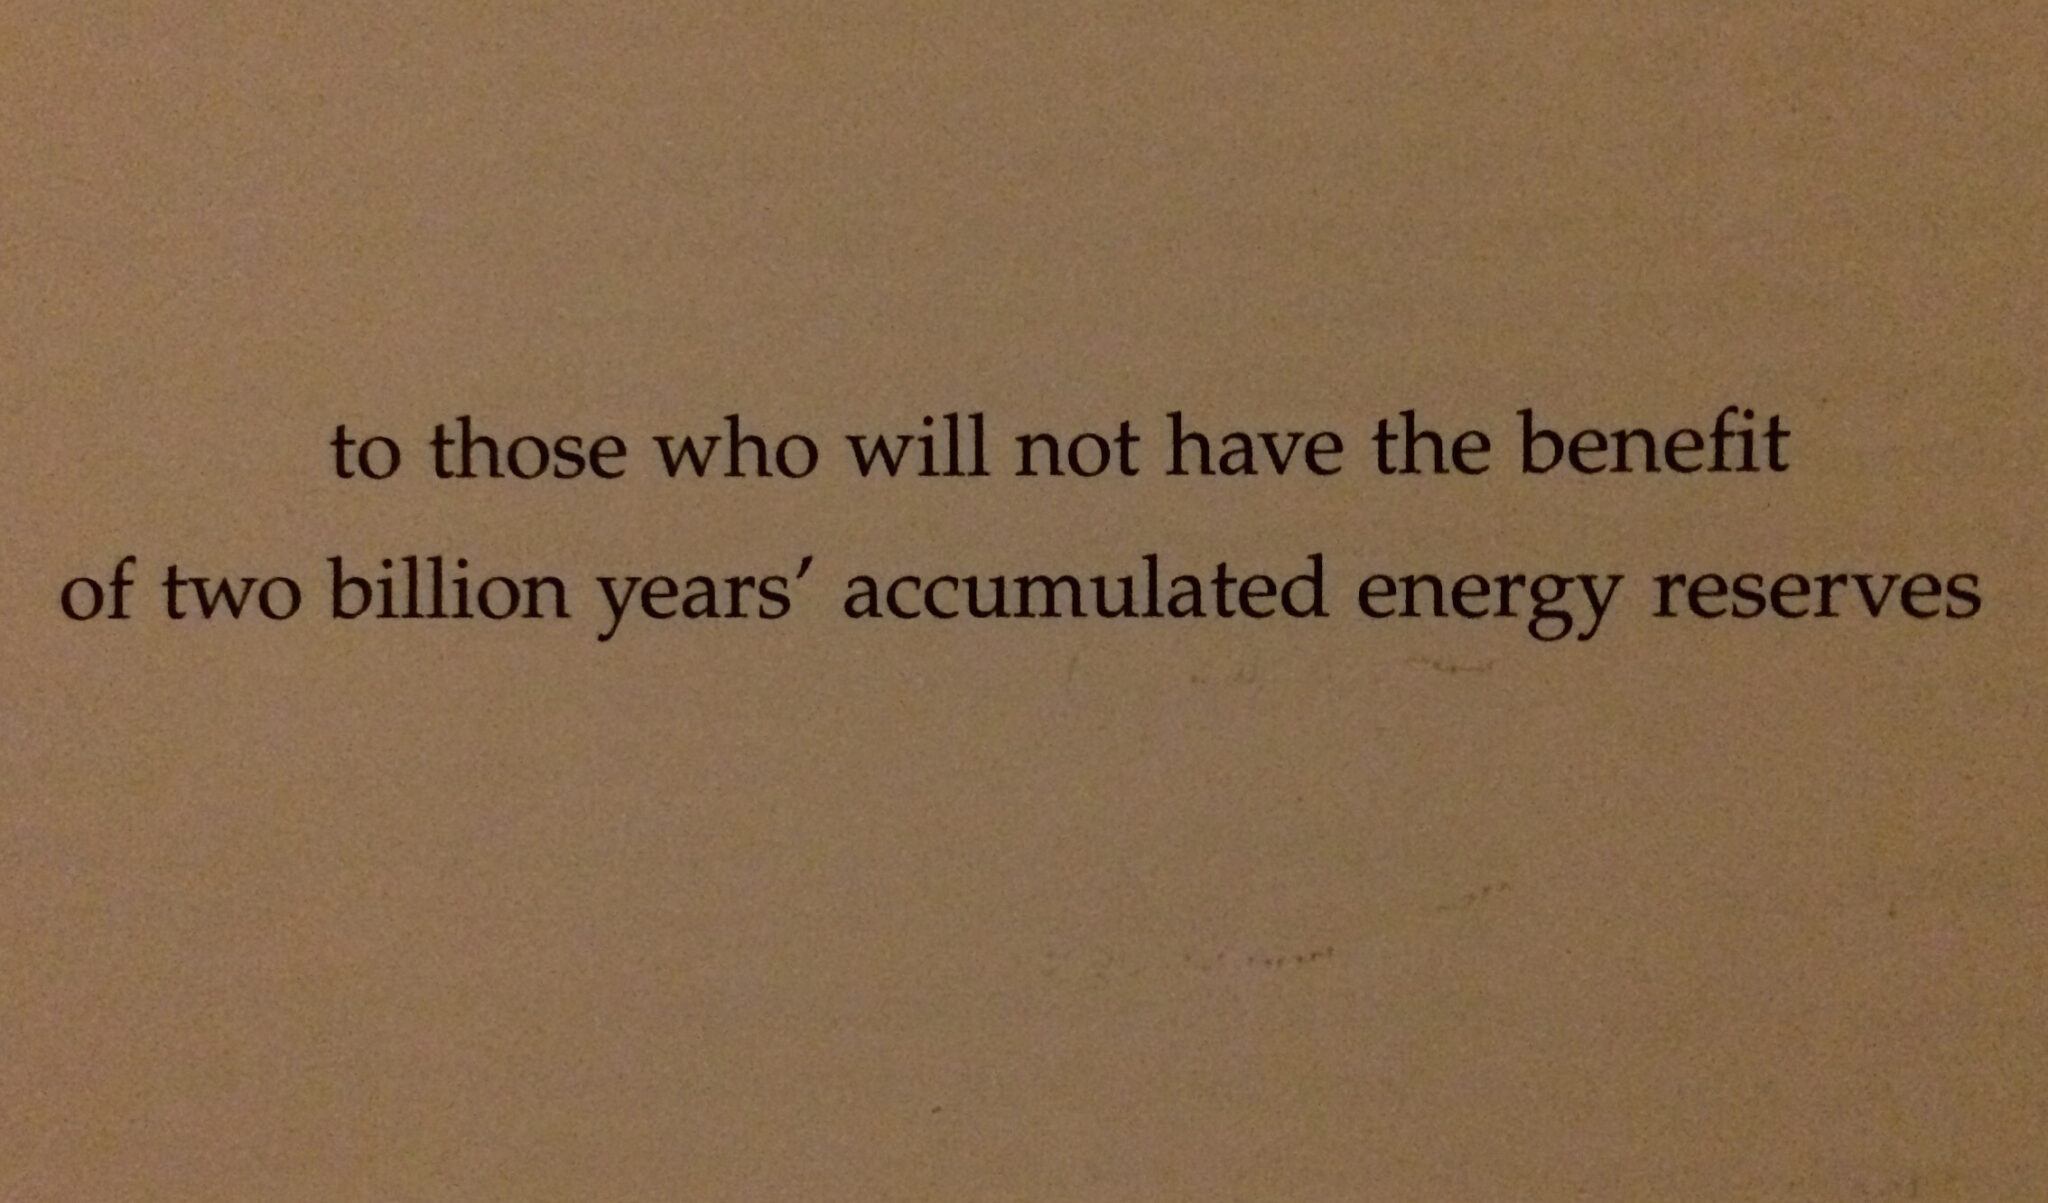 to those who will not have the benefit of two billion years' accumulated energy reserves - David Mackay